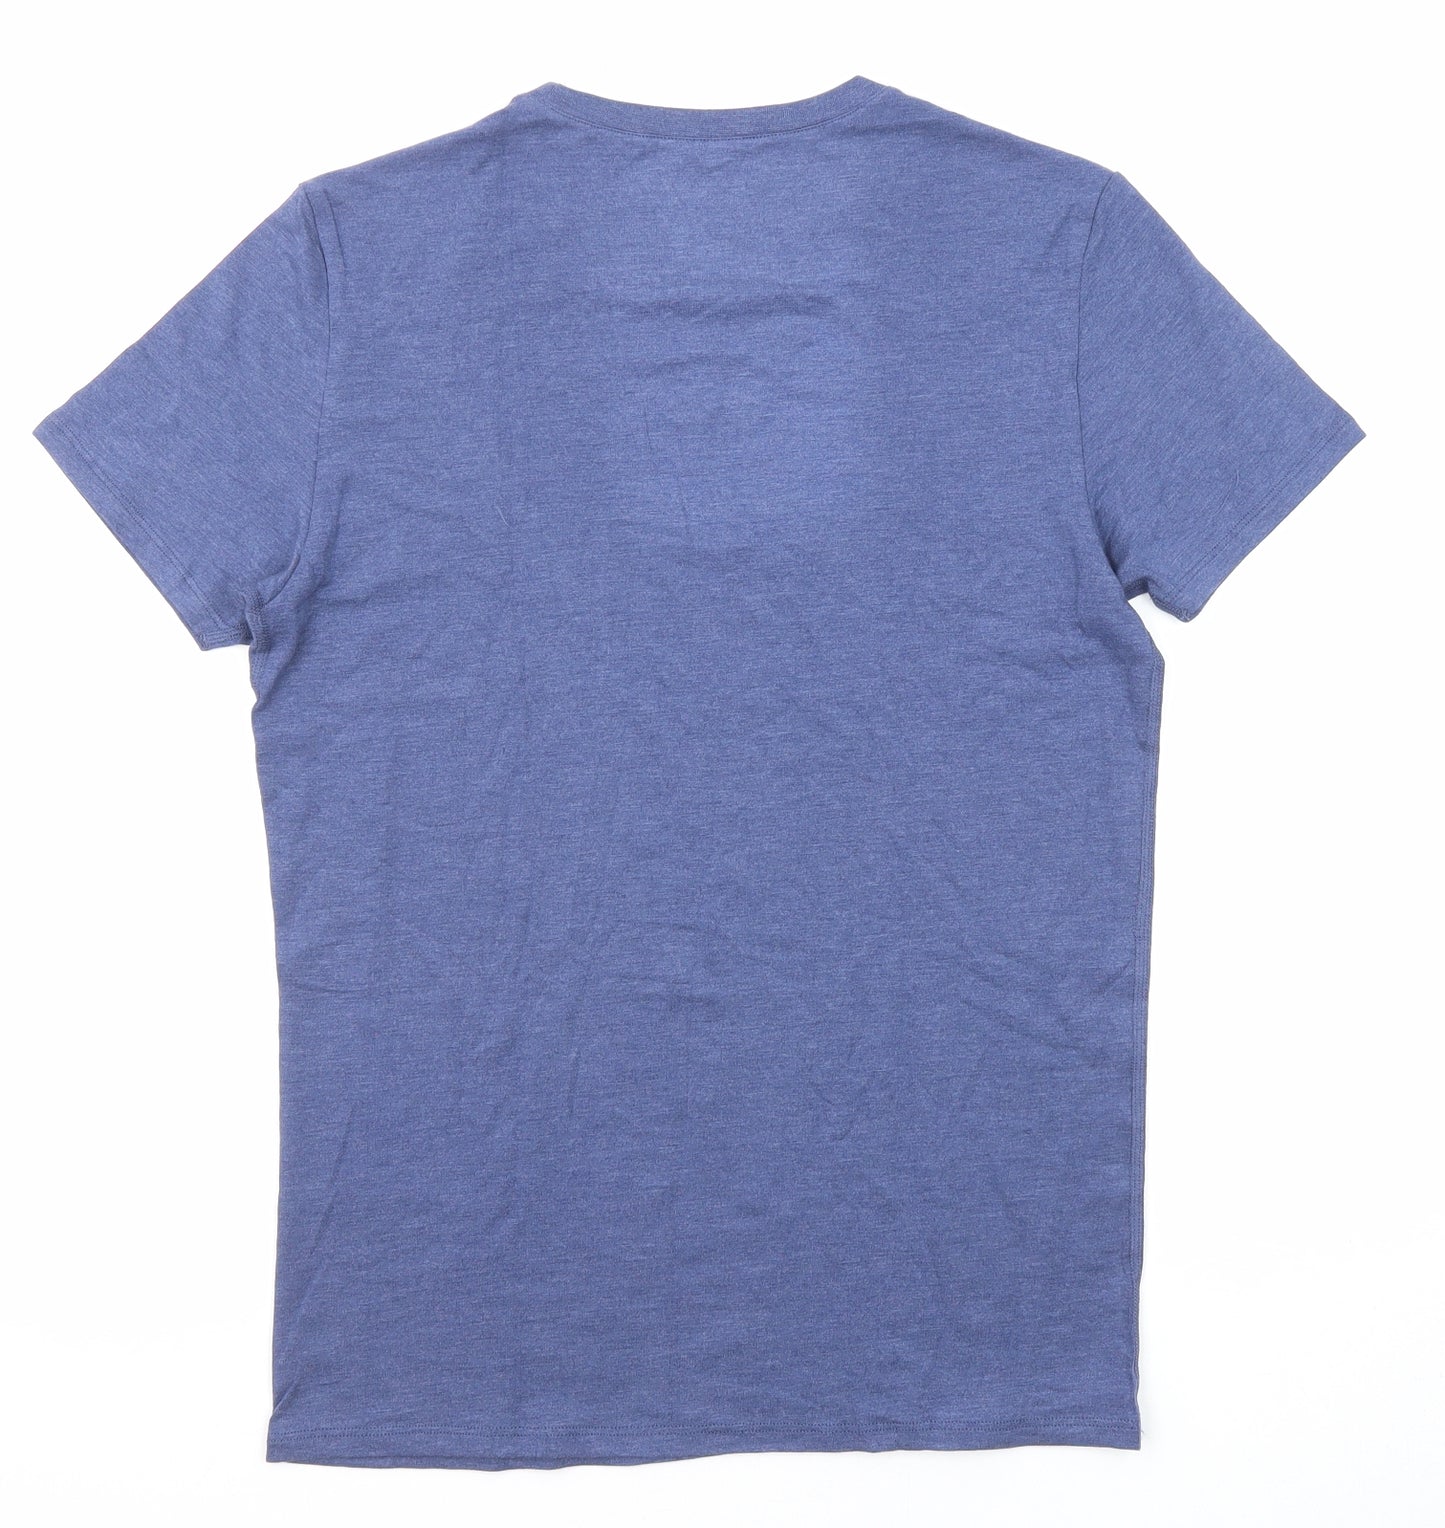 Marks and Spencer Mens Blue Polyester T-Shirt Size S Round Neck - Thermal